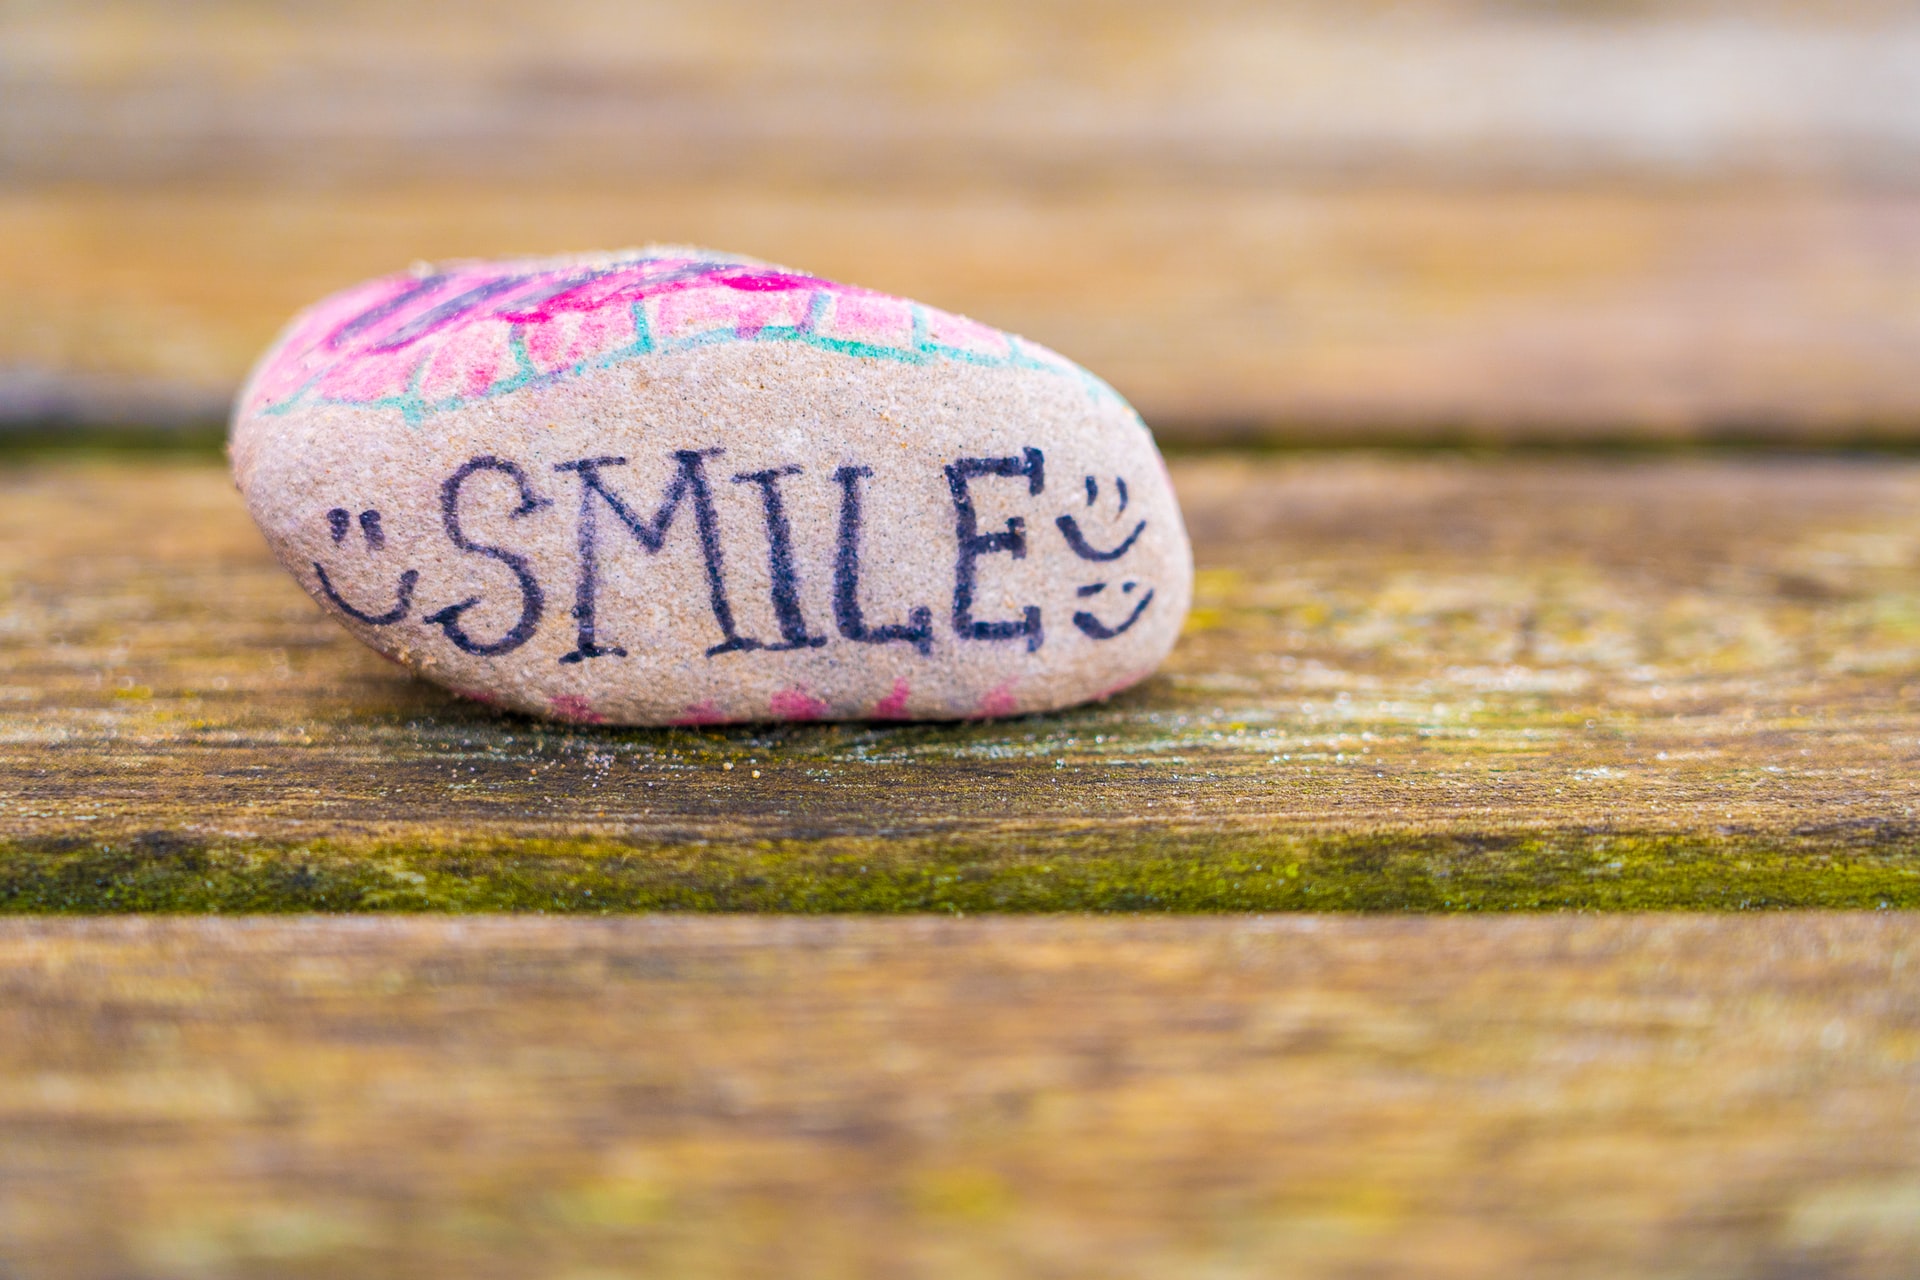 15 Ways to Spread Positivity In Today’s Uncertain World